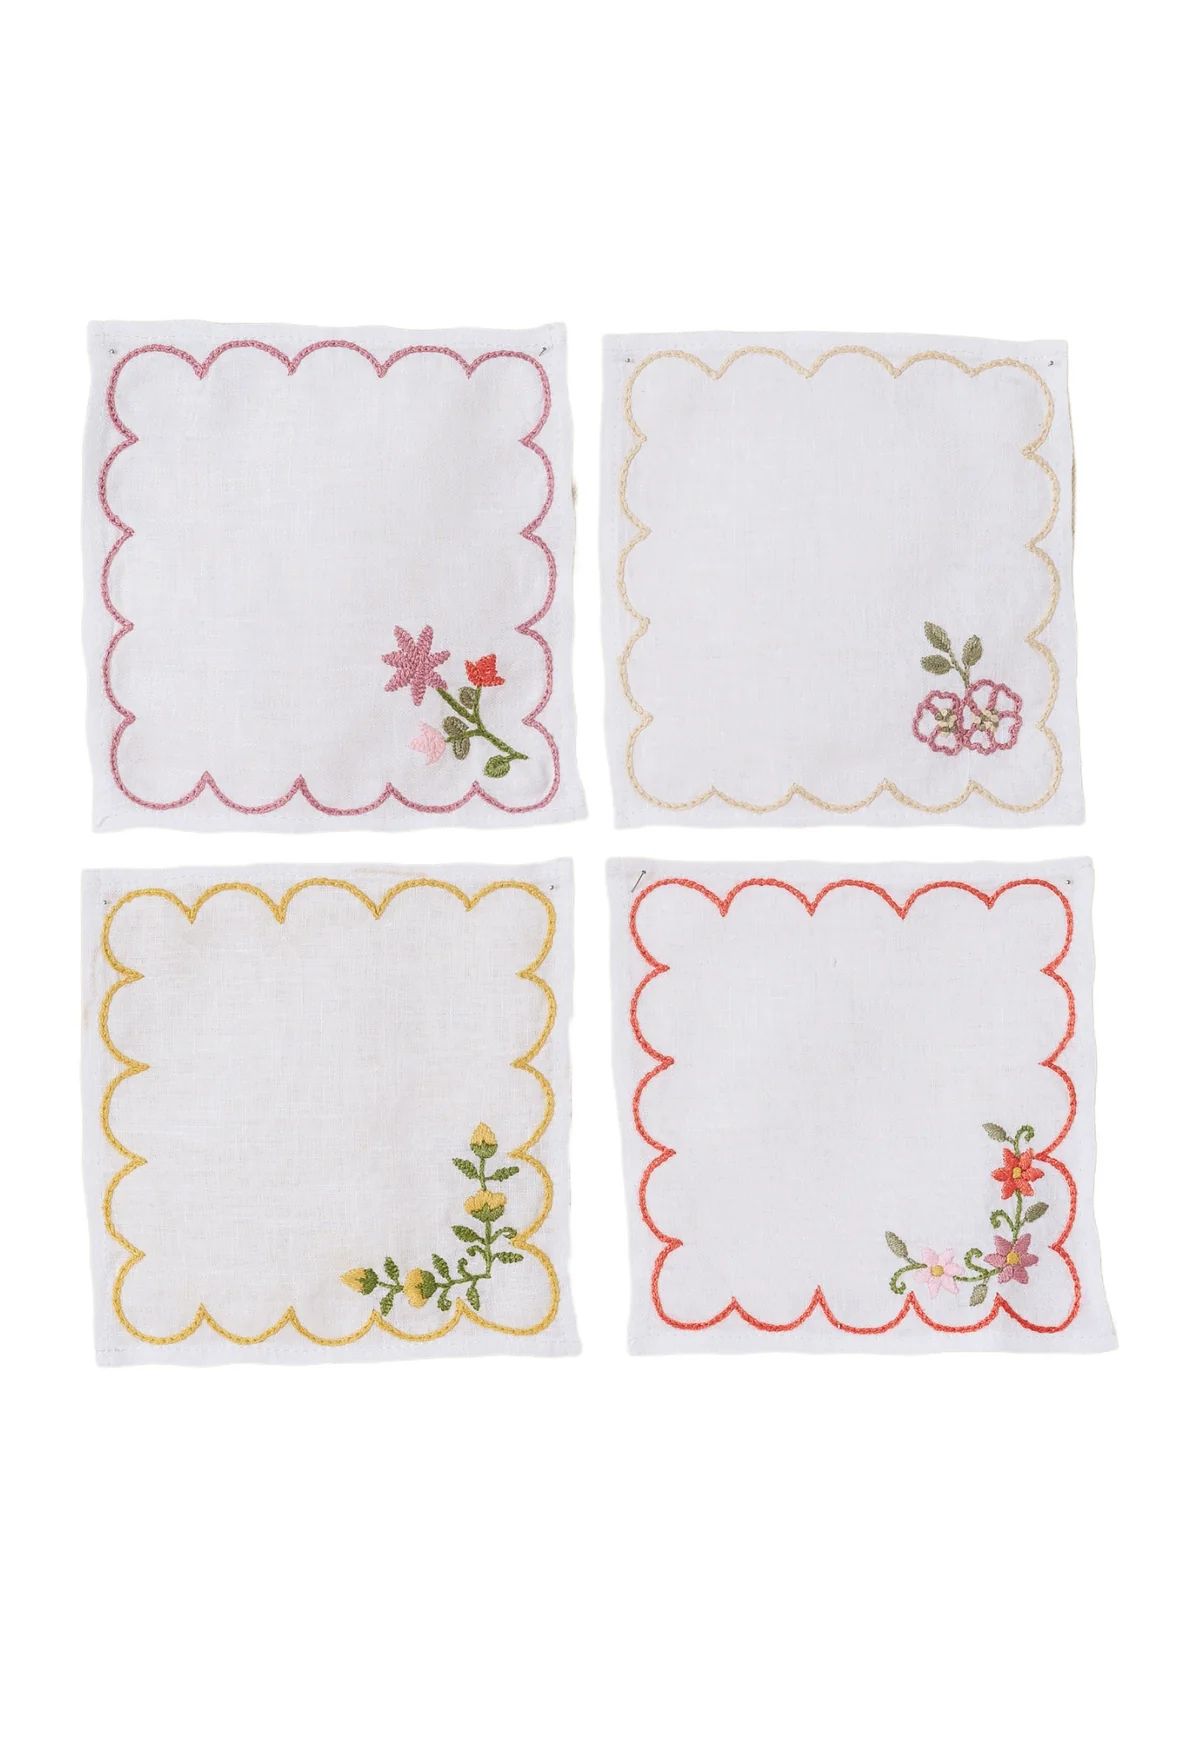 OTM Exclusive: Cocktail Napkins, Set of 4 | Over The Moon